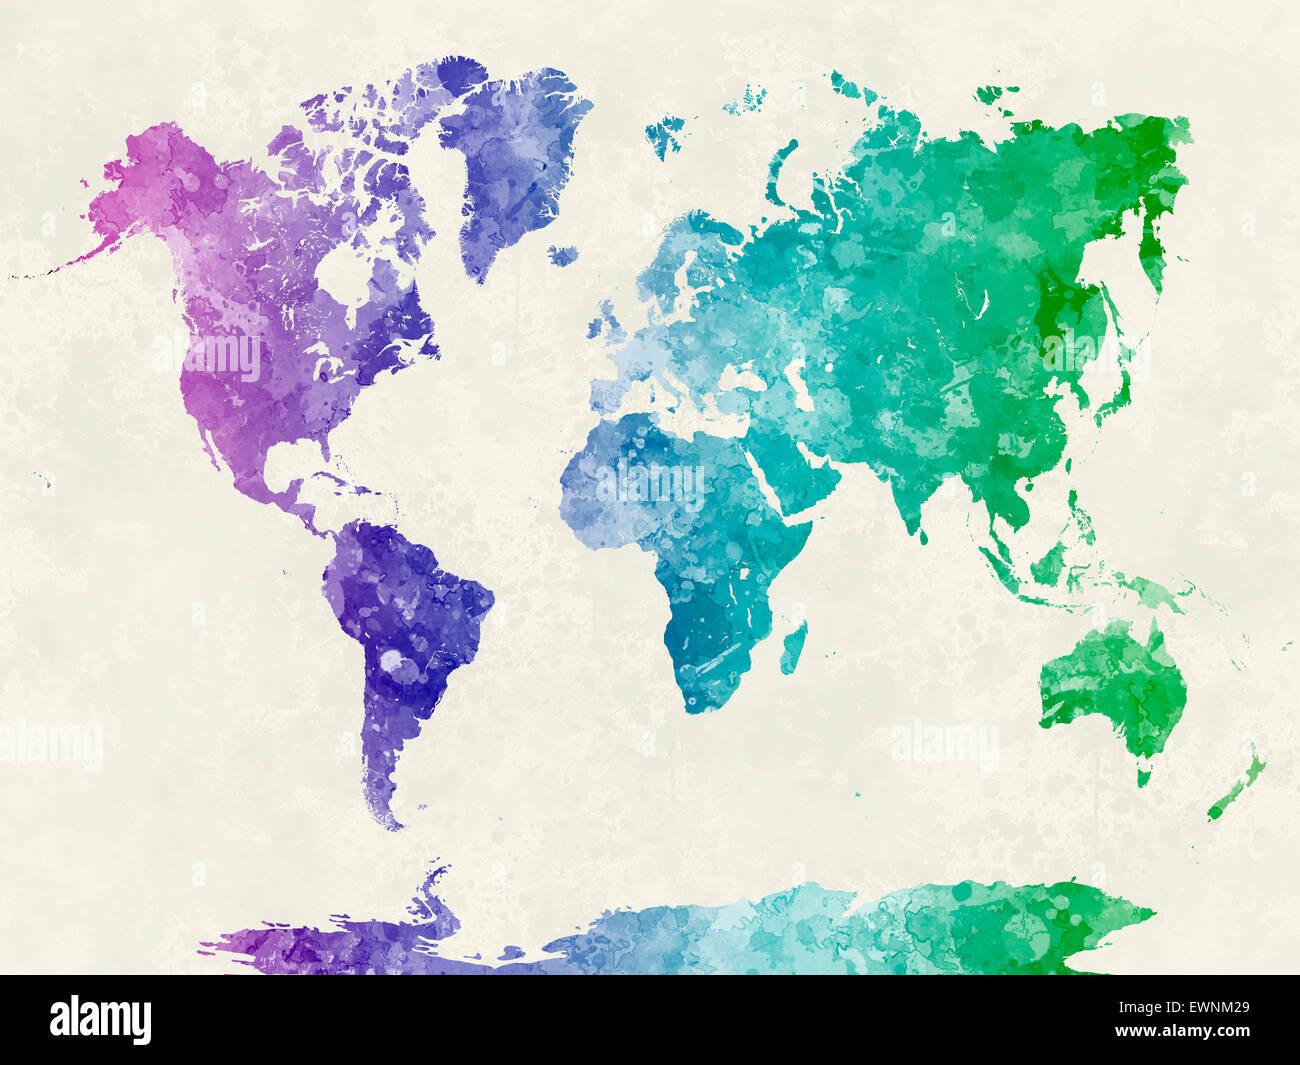 World map in watercolor painting abstract splatters Stock Photo